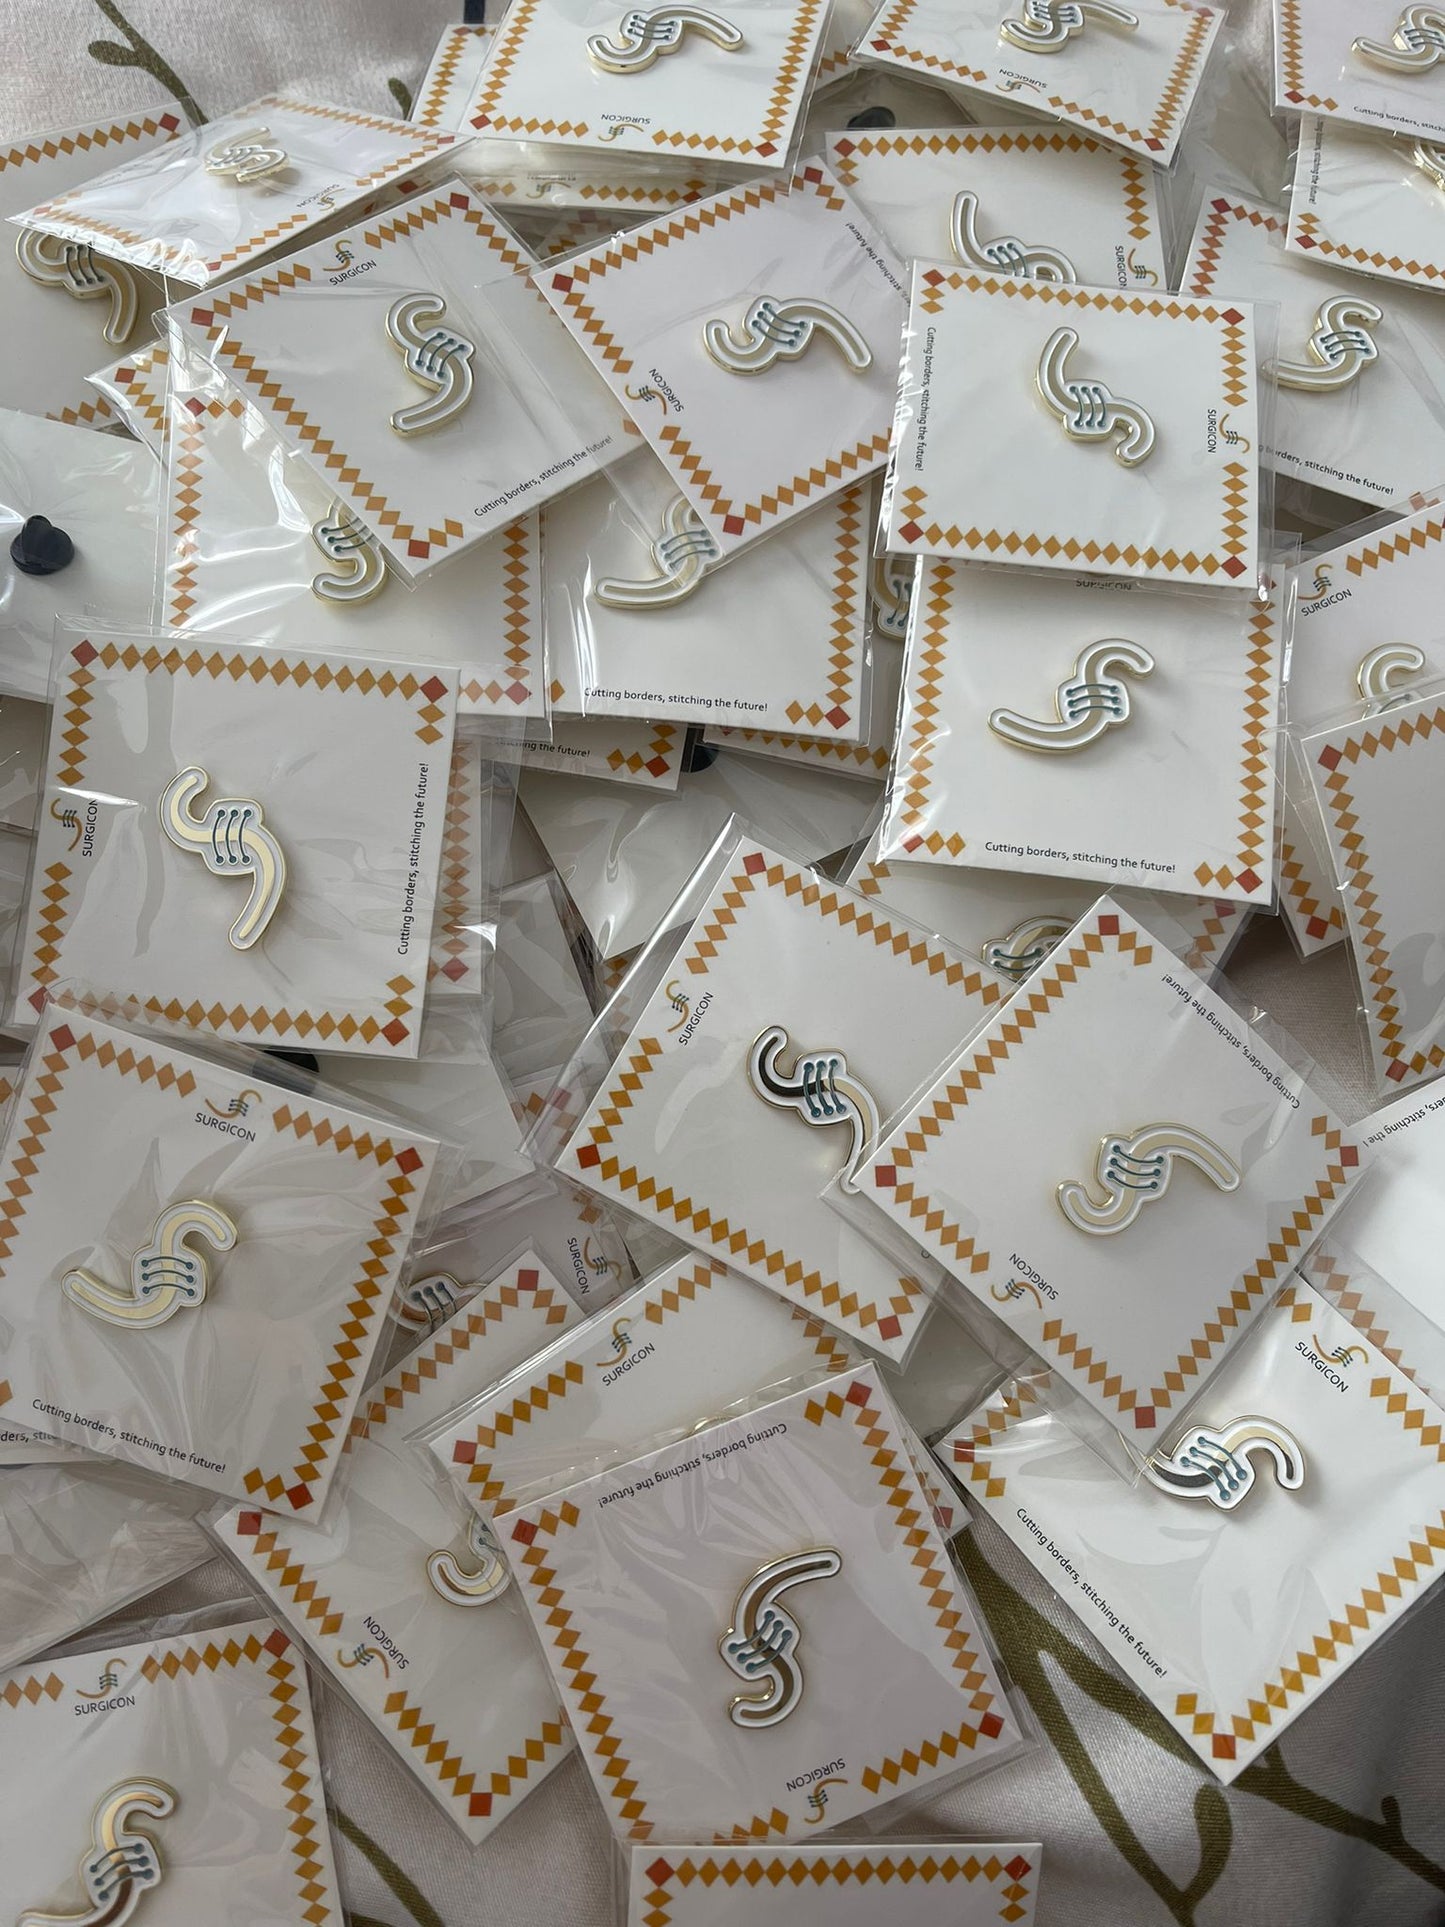 Pins for SURGICON 2022